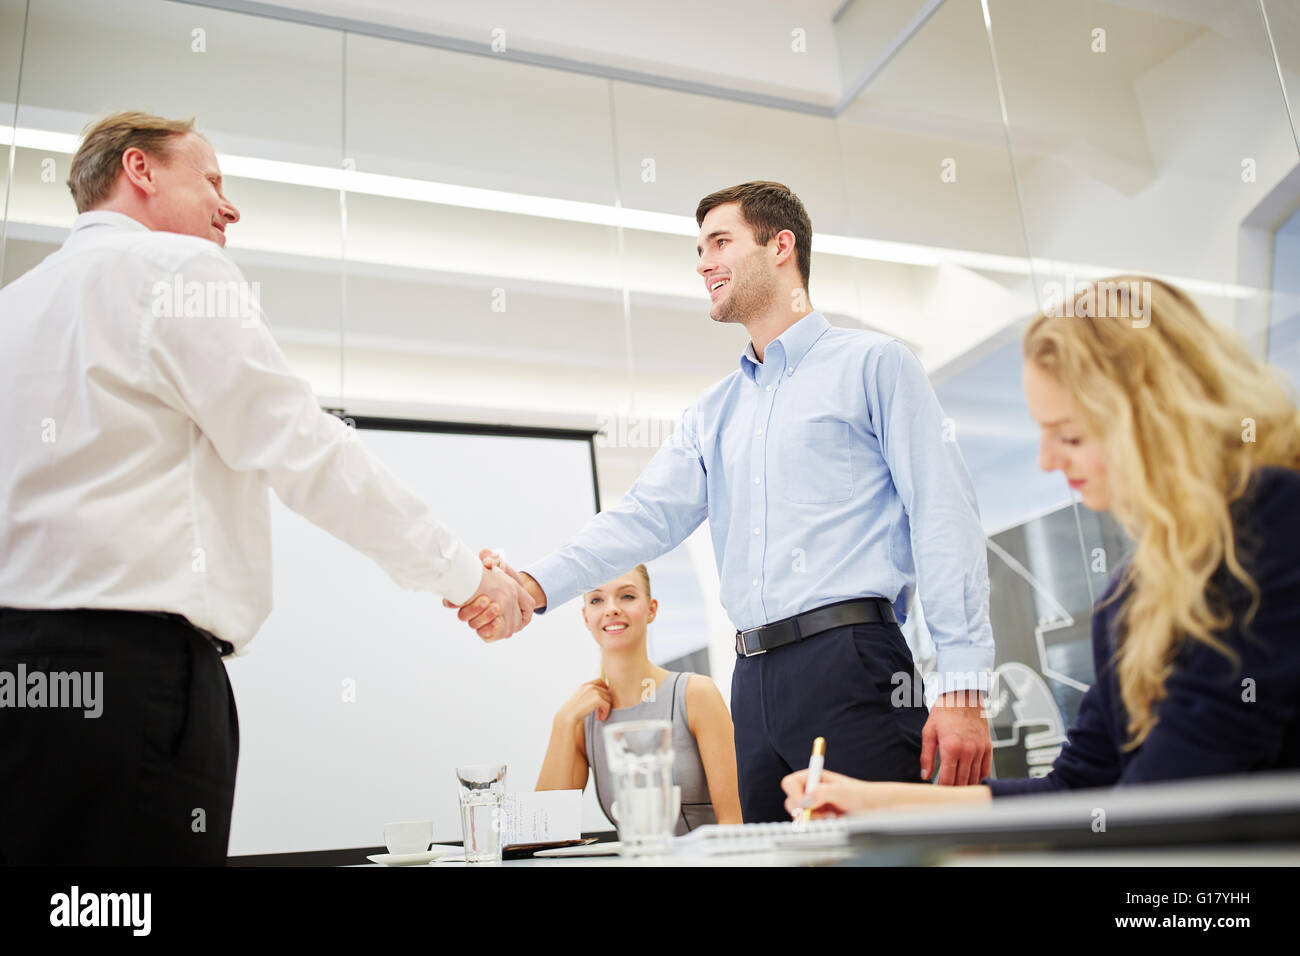 Congratulation with a hand shake between successful business people Stock Photo